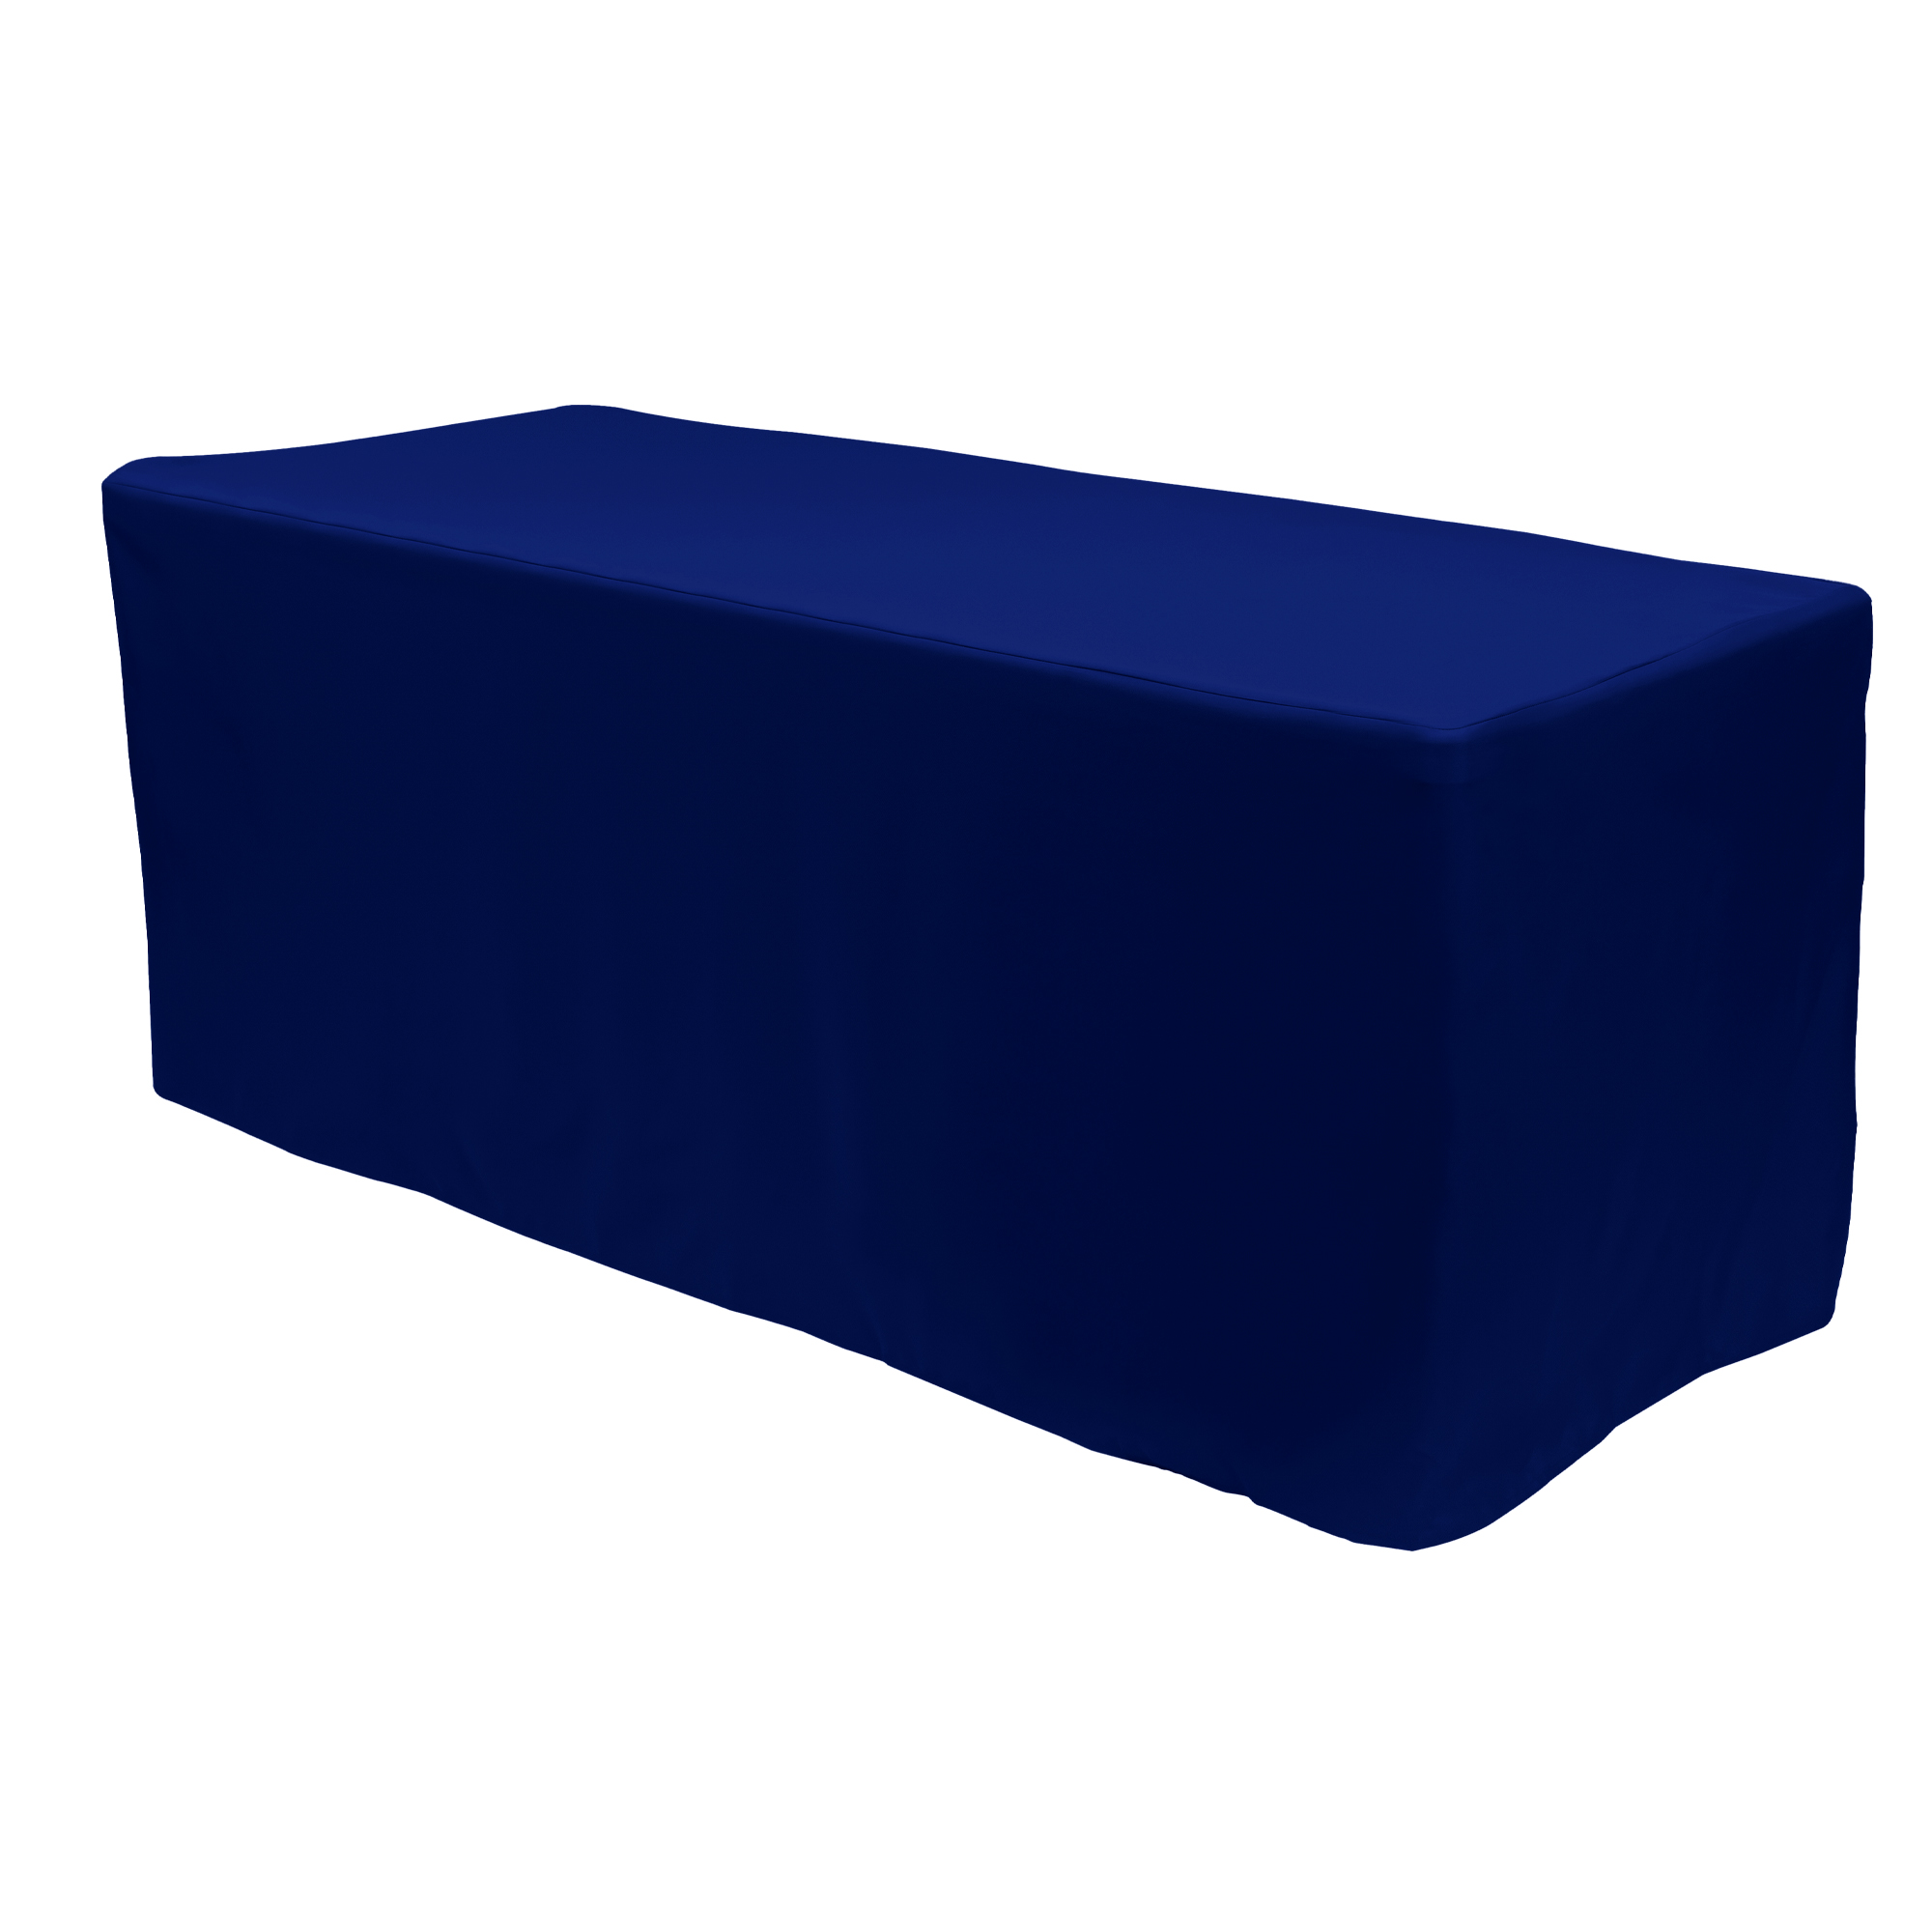 Fitted Polyester Rectangular Table Cover 8ft - Royal Blue